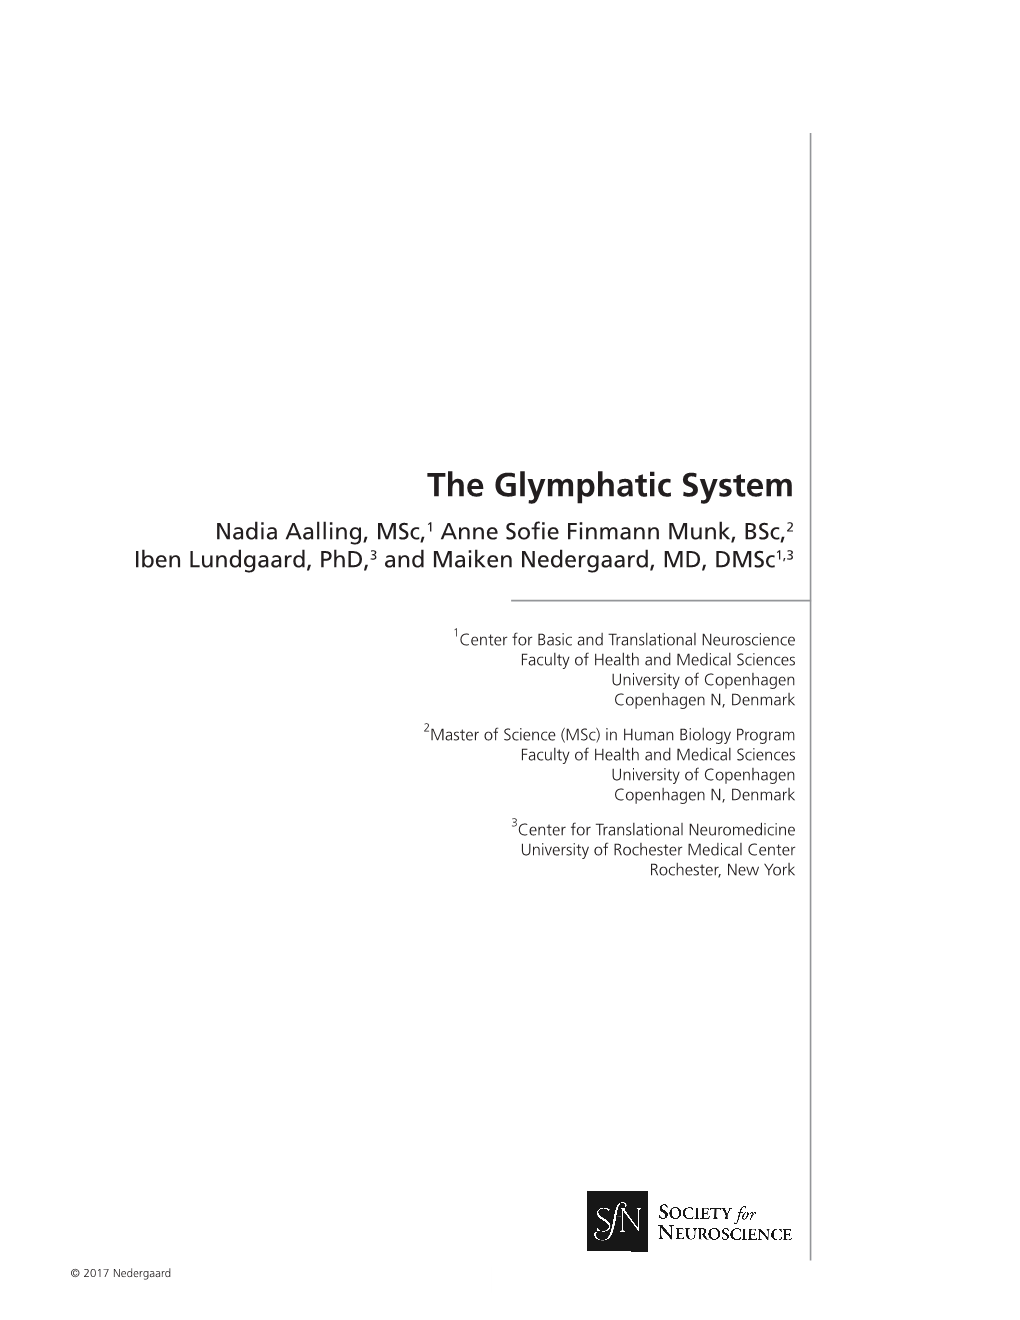 The-Glymphatic-System.Pdf